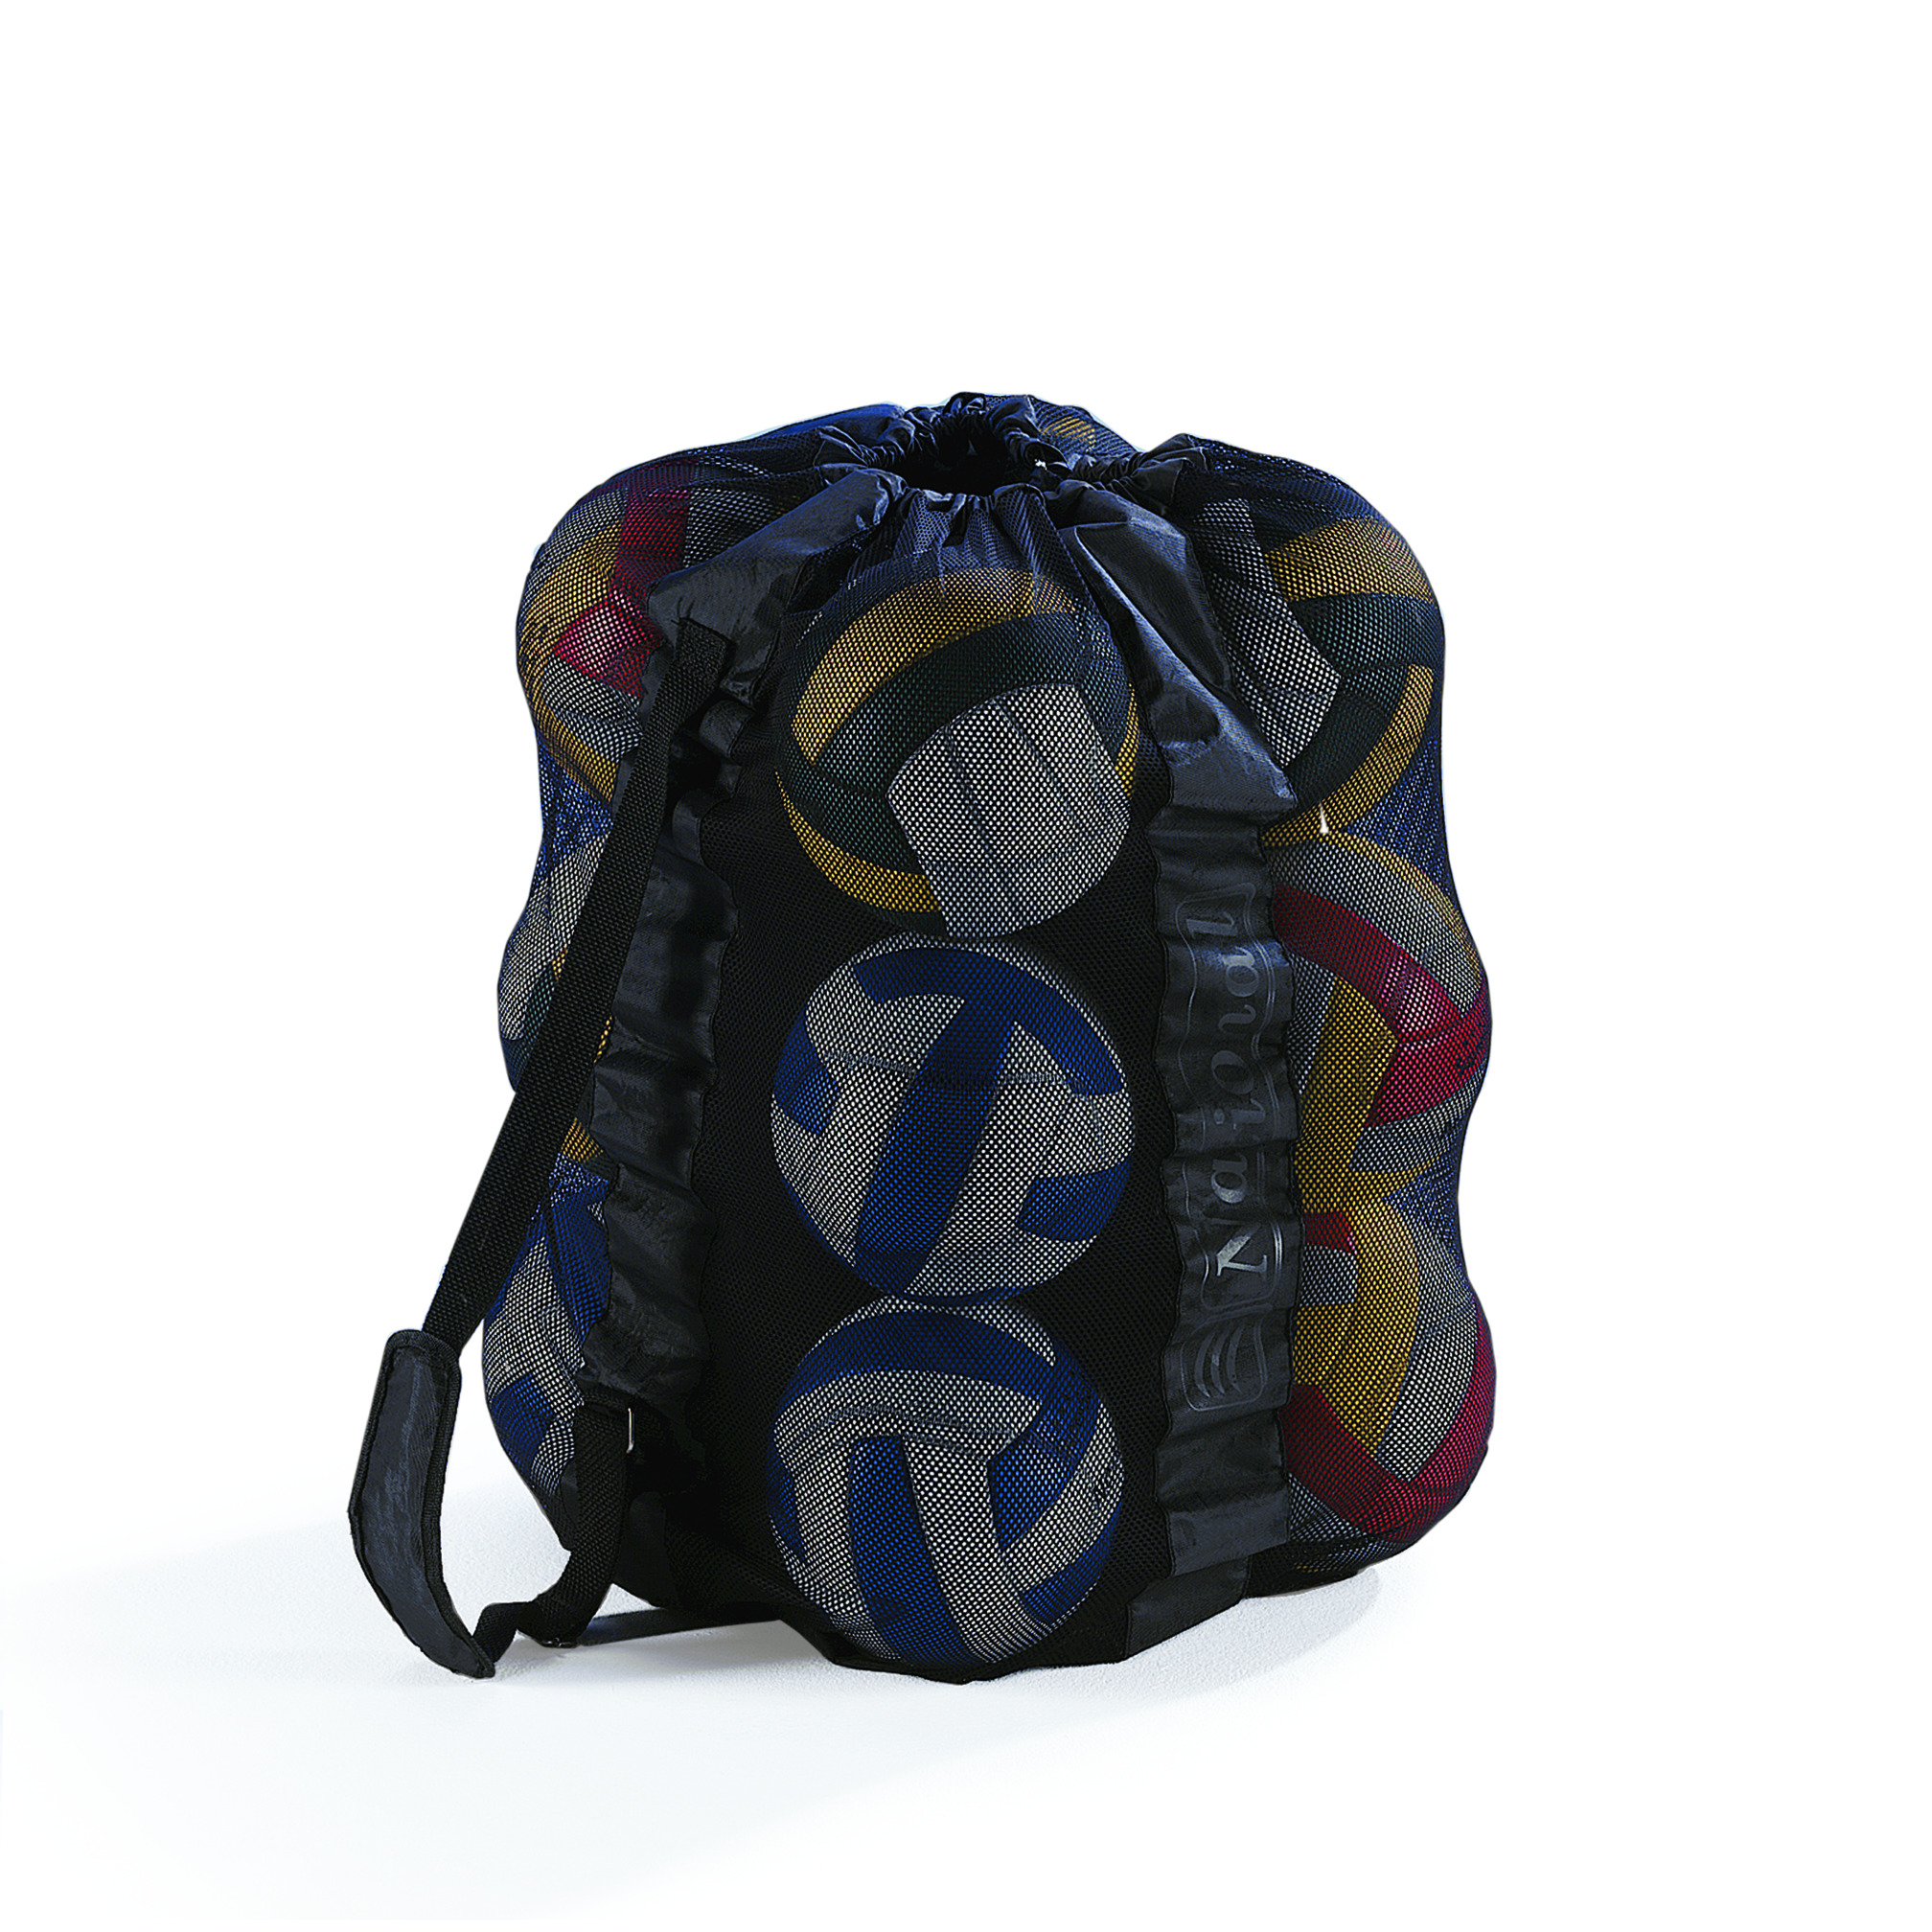 Balls bag with compartments